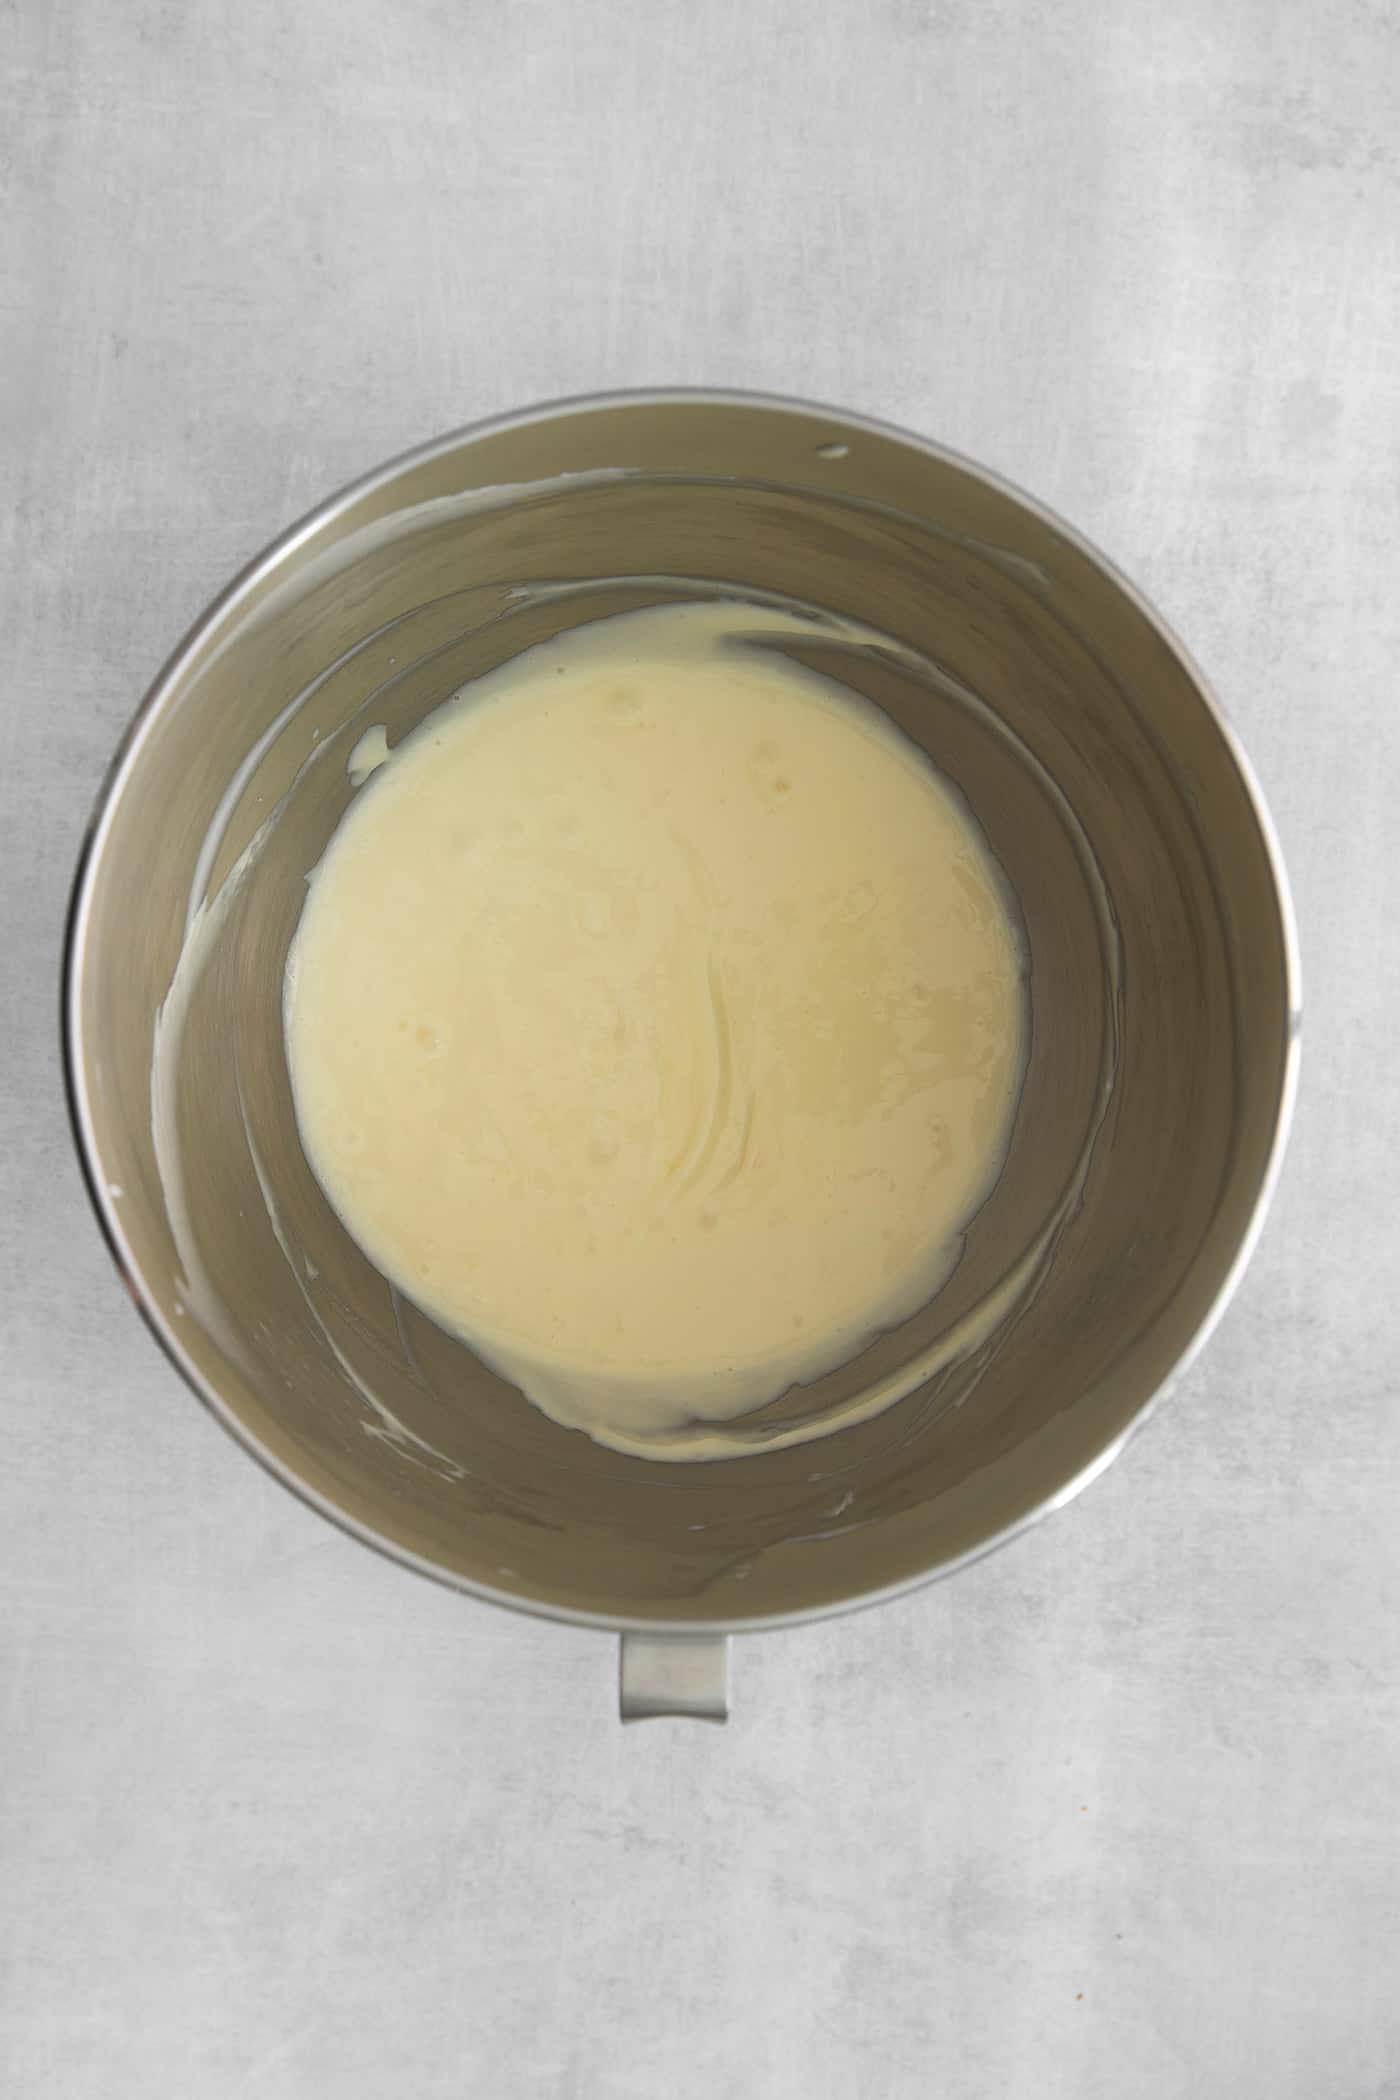 cheesecake layer mixed in a stainless steel bowl